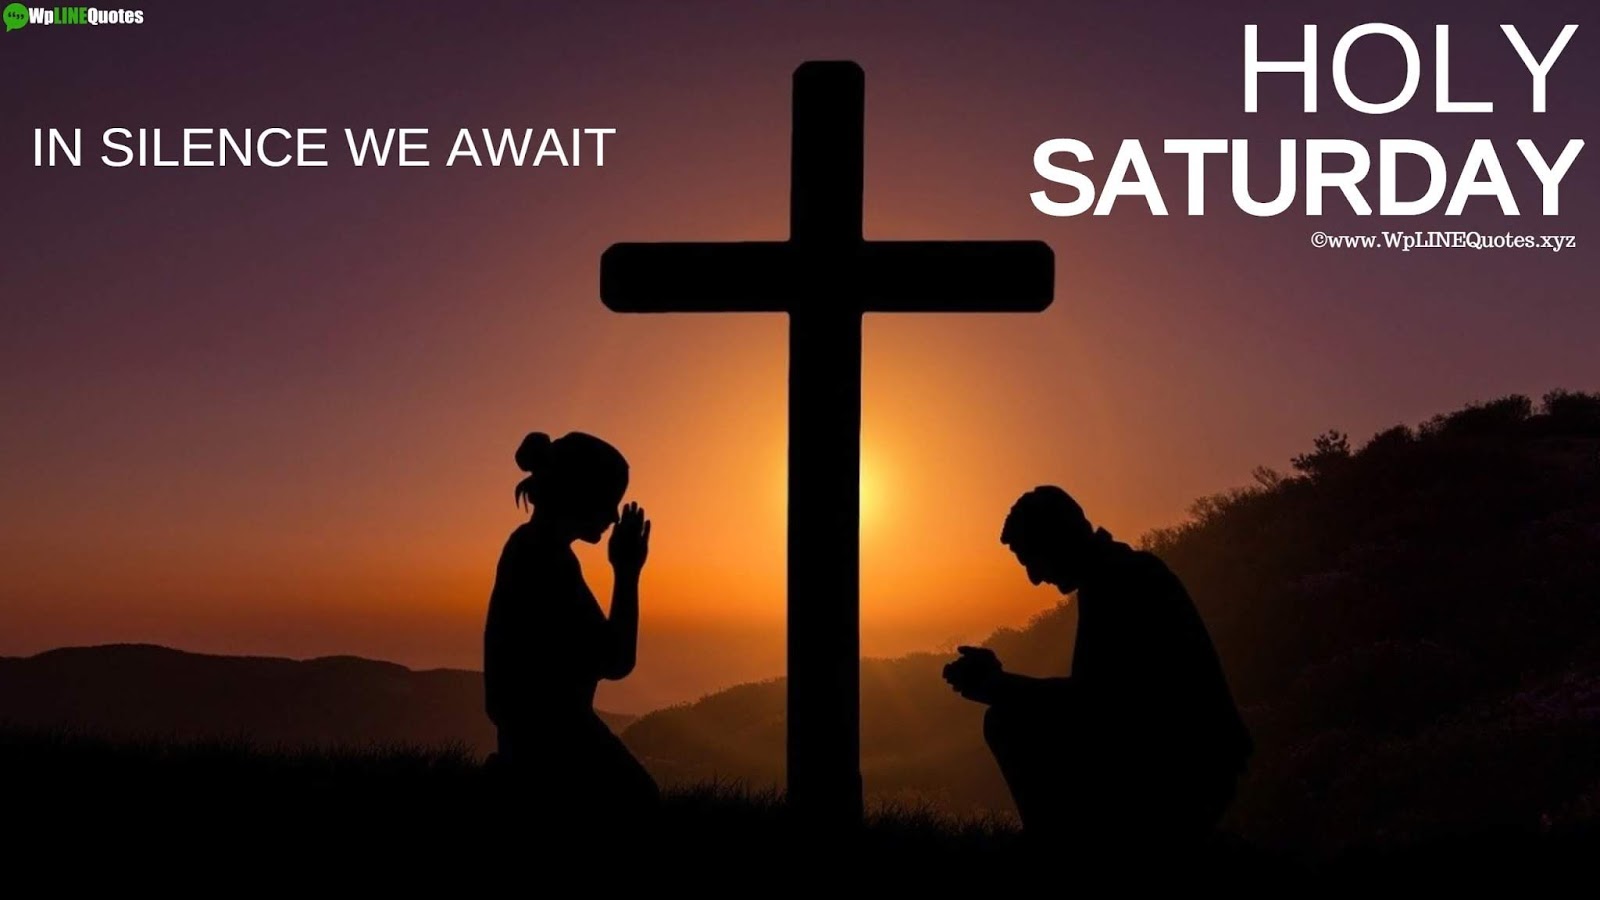 Holy Saturday Quotes, Wishes, Greetings, Message, History, Images, Pictures, Wallpaper